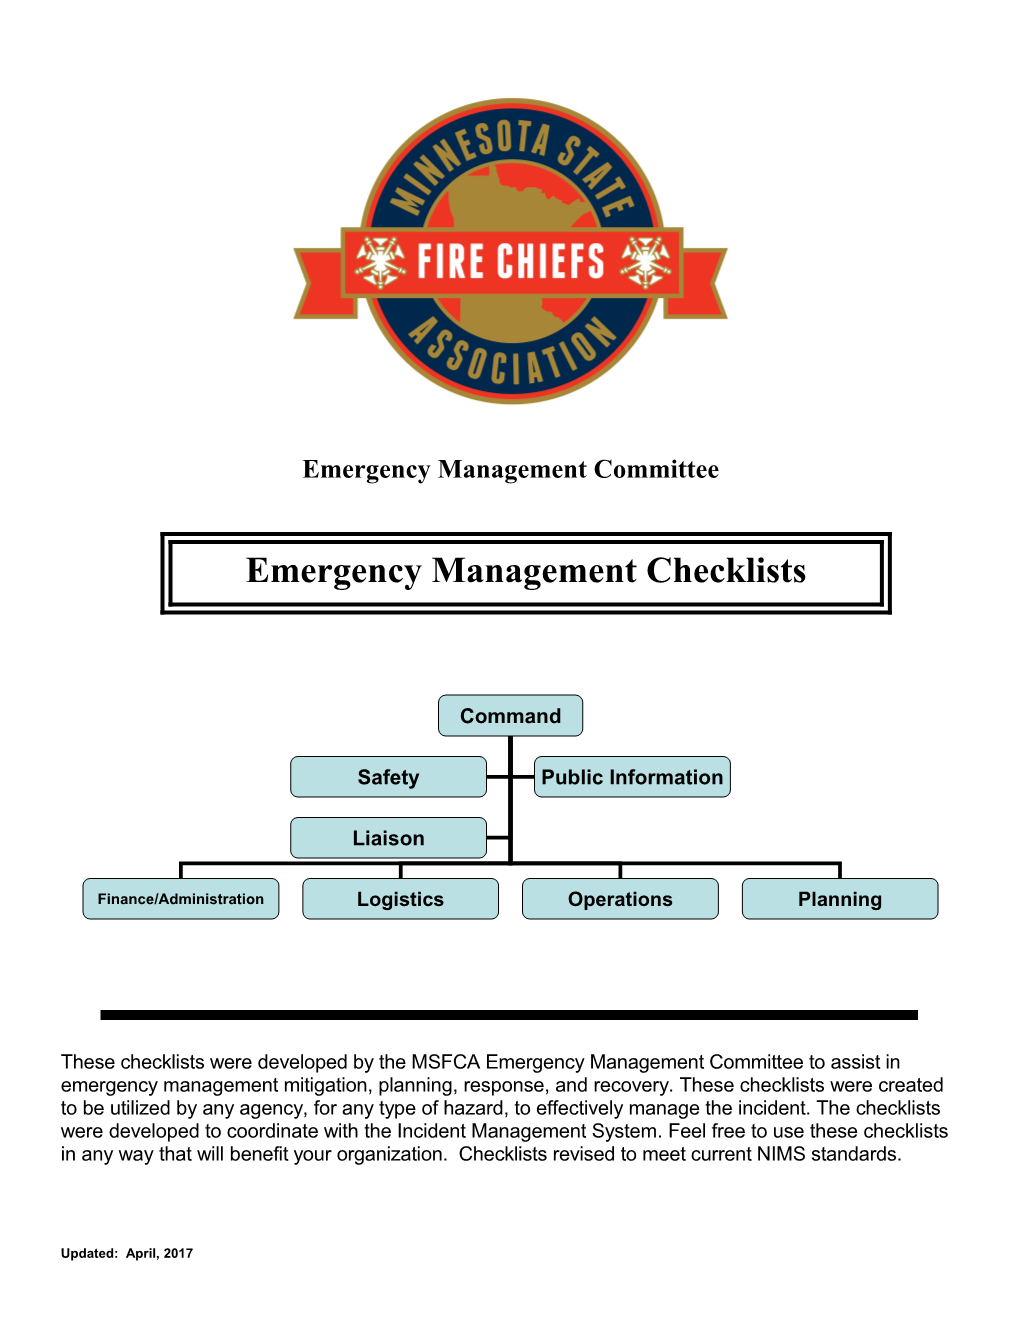 Emergency Management Committee